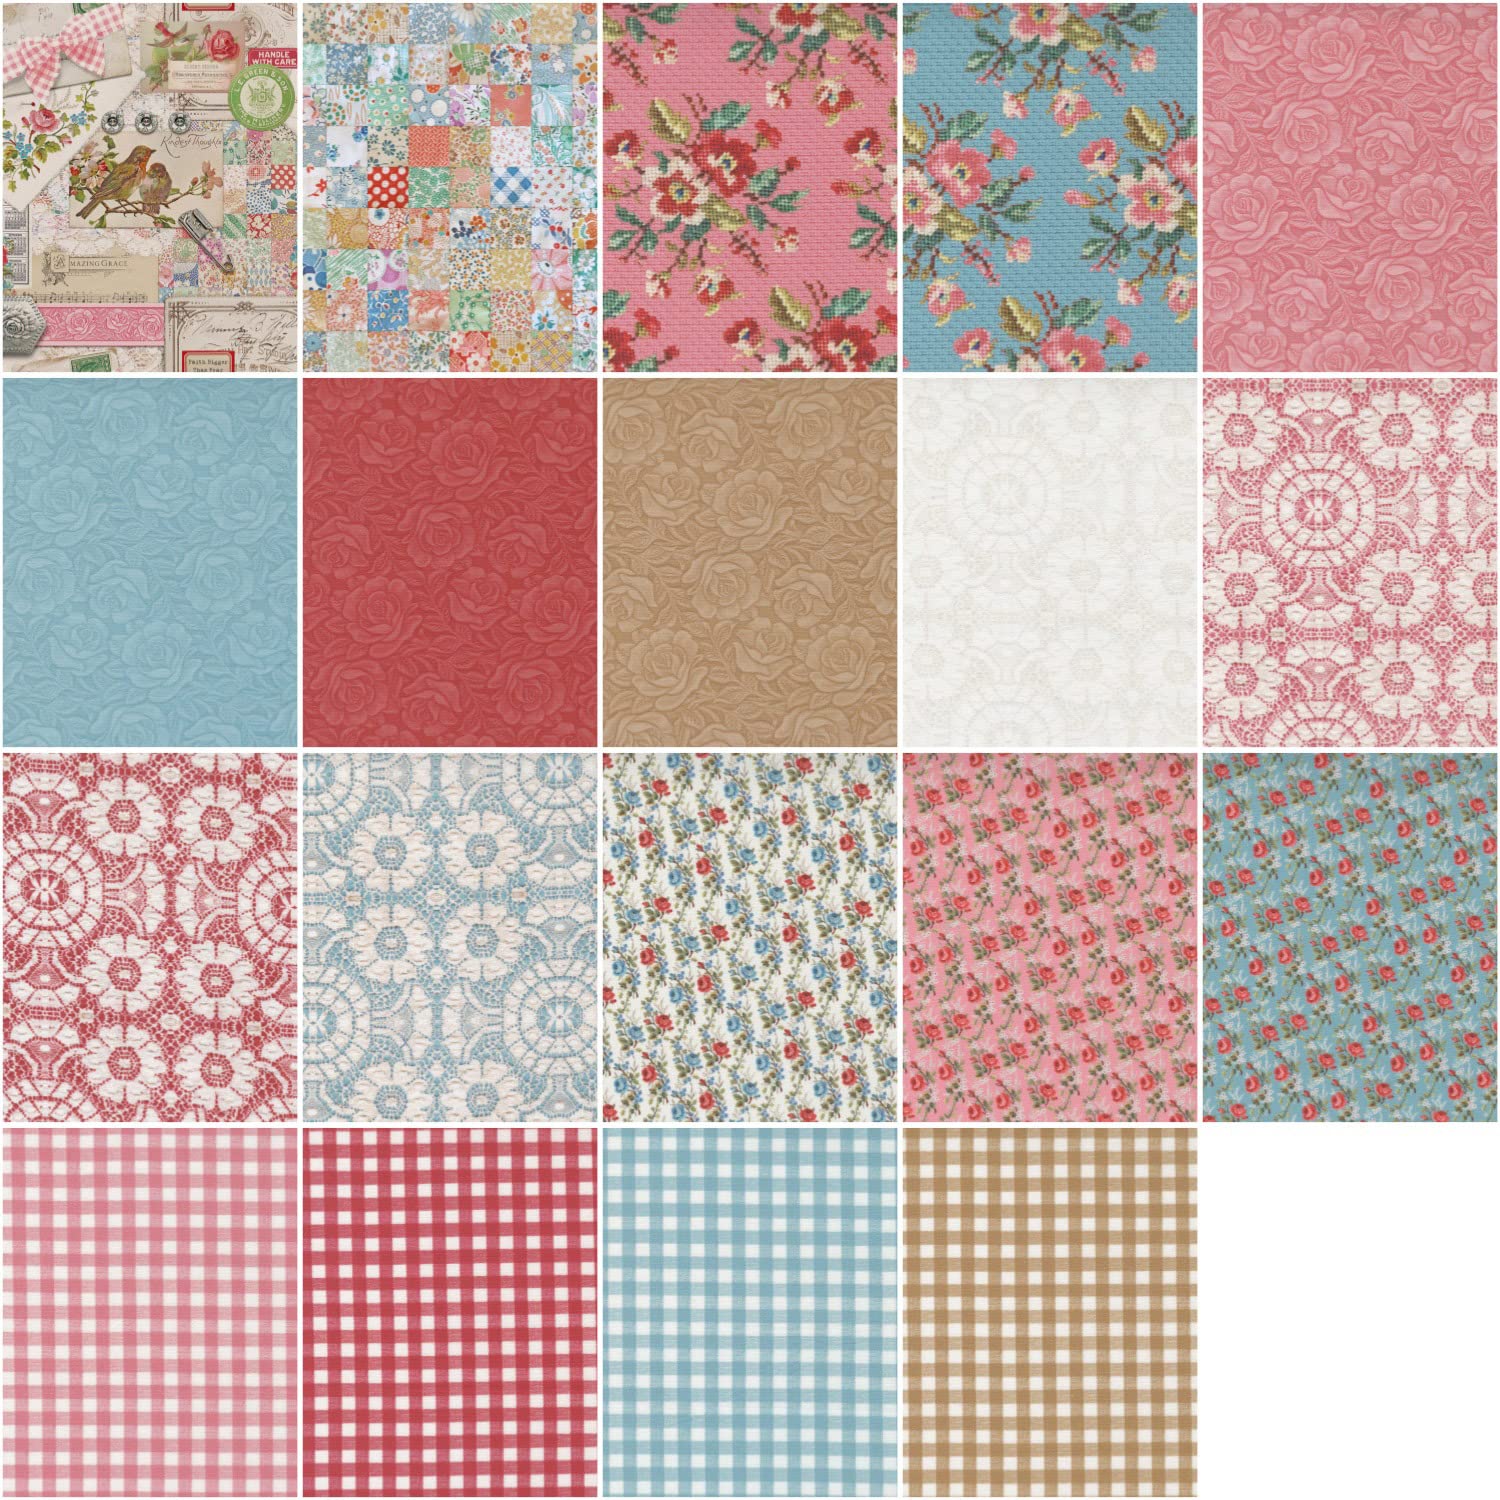 Moda Fabrics Leather & Lace and Amazing Grace Charm Pack by Cathe Holden; 42-5'' Precut Fabric Quilt Squares